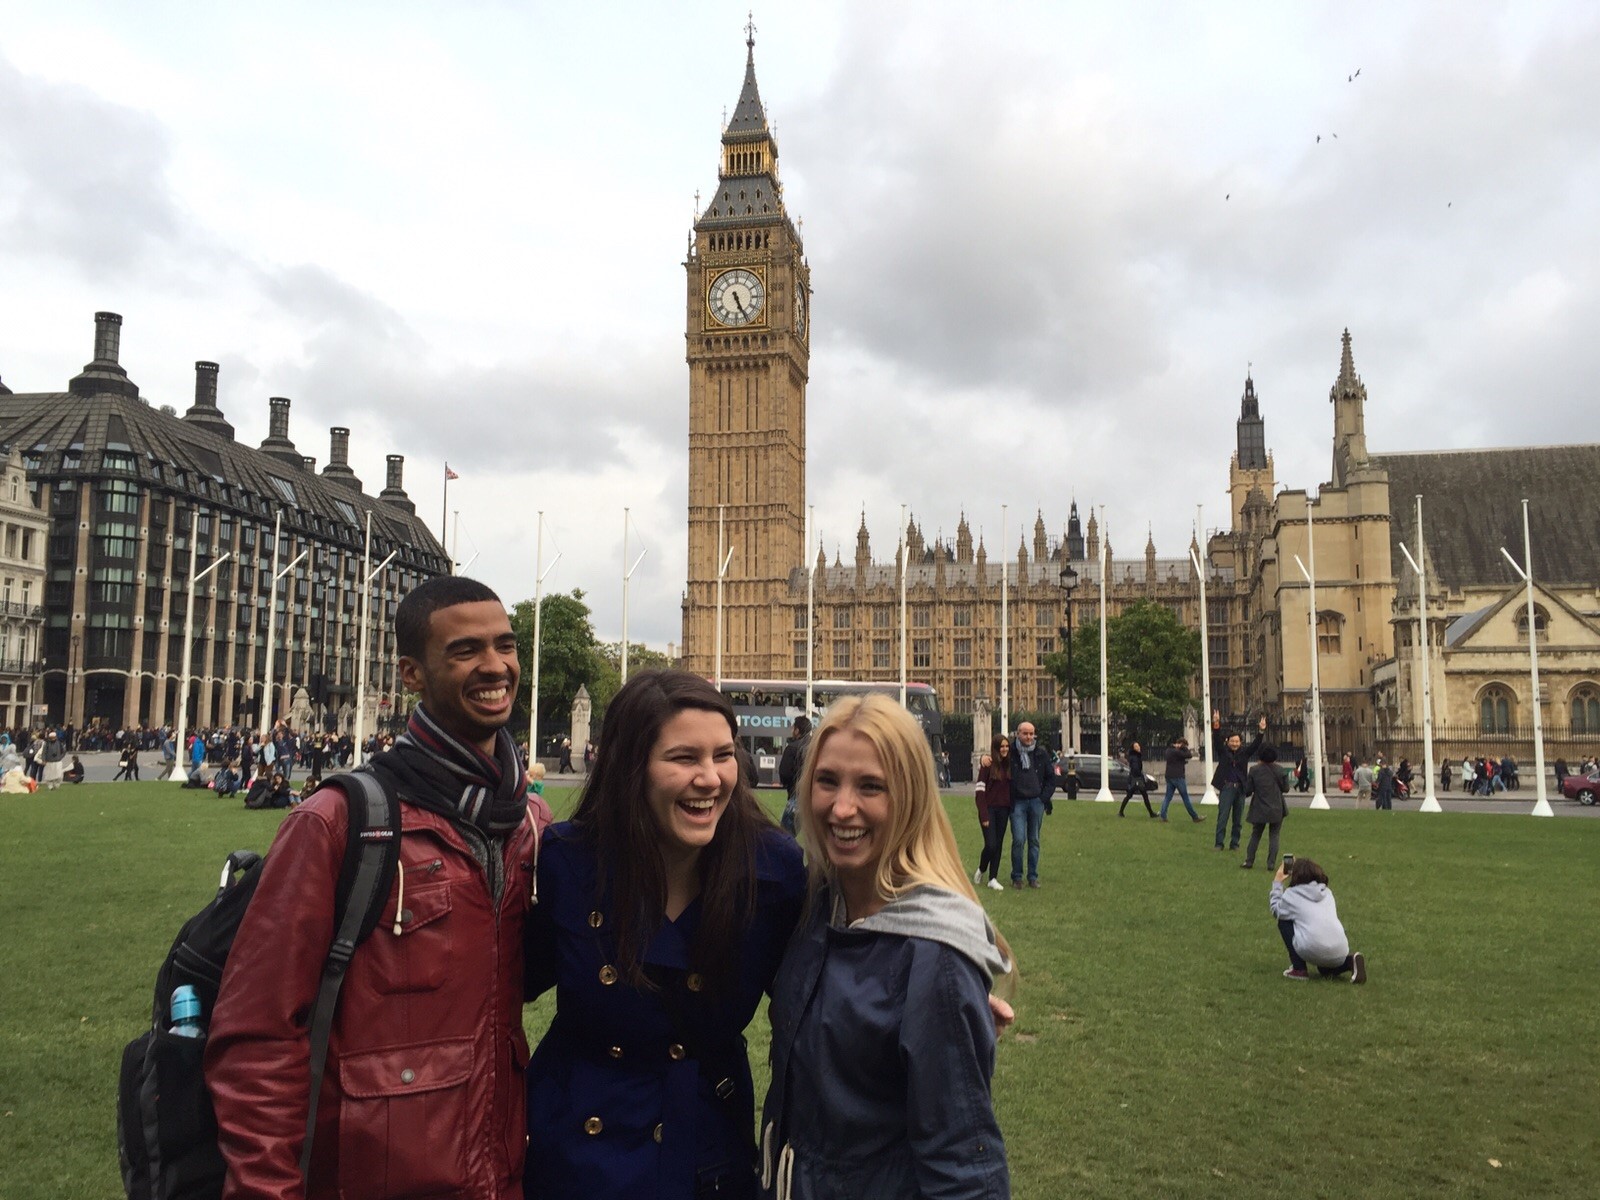 Students smiling outside of parliament building in London, England